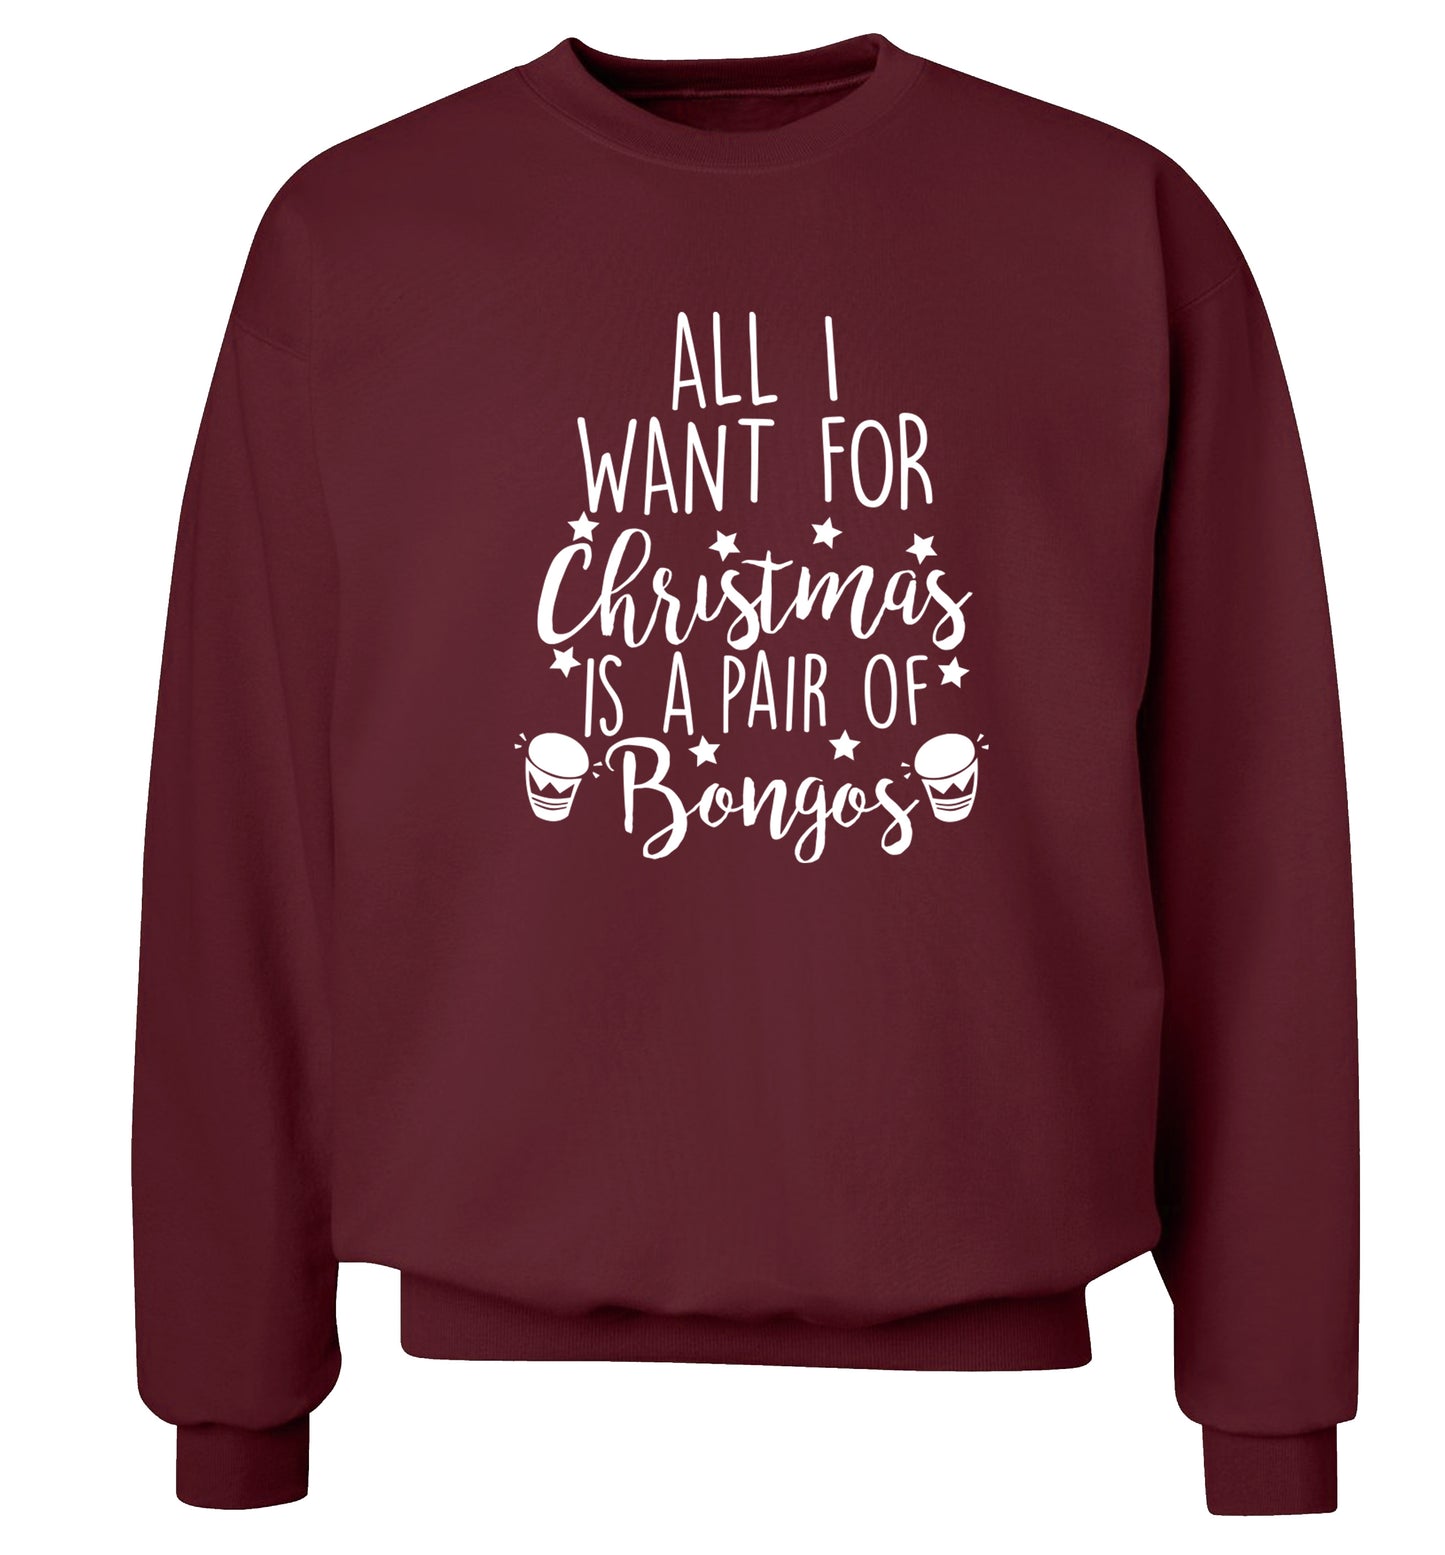 All I want for Christmas is a pair of bongos! Adult's unisex maroon Sweater 2XL